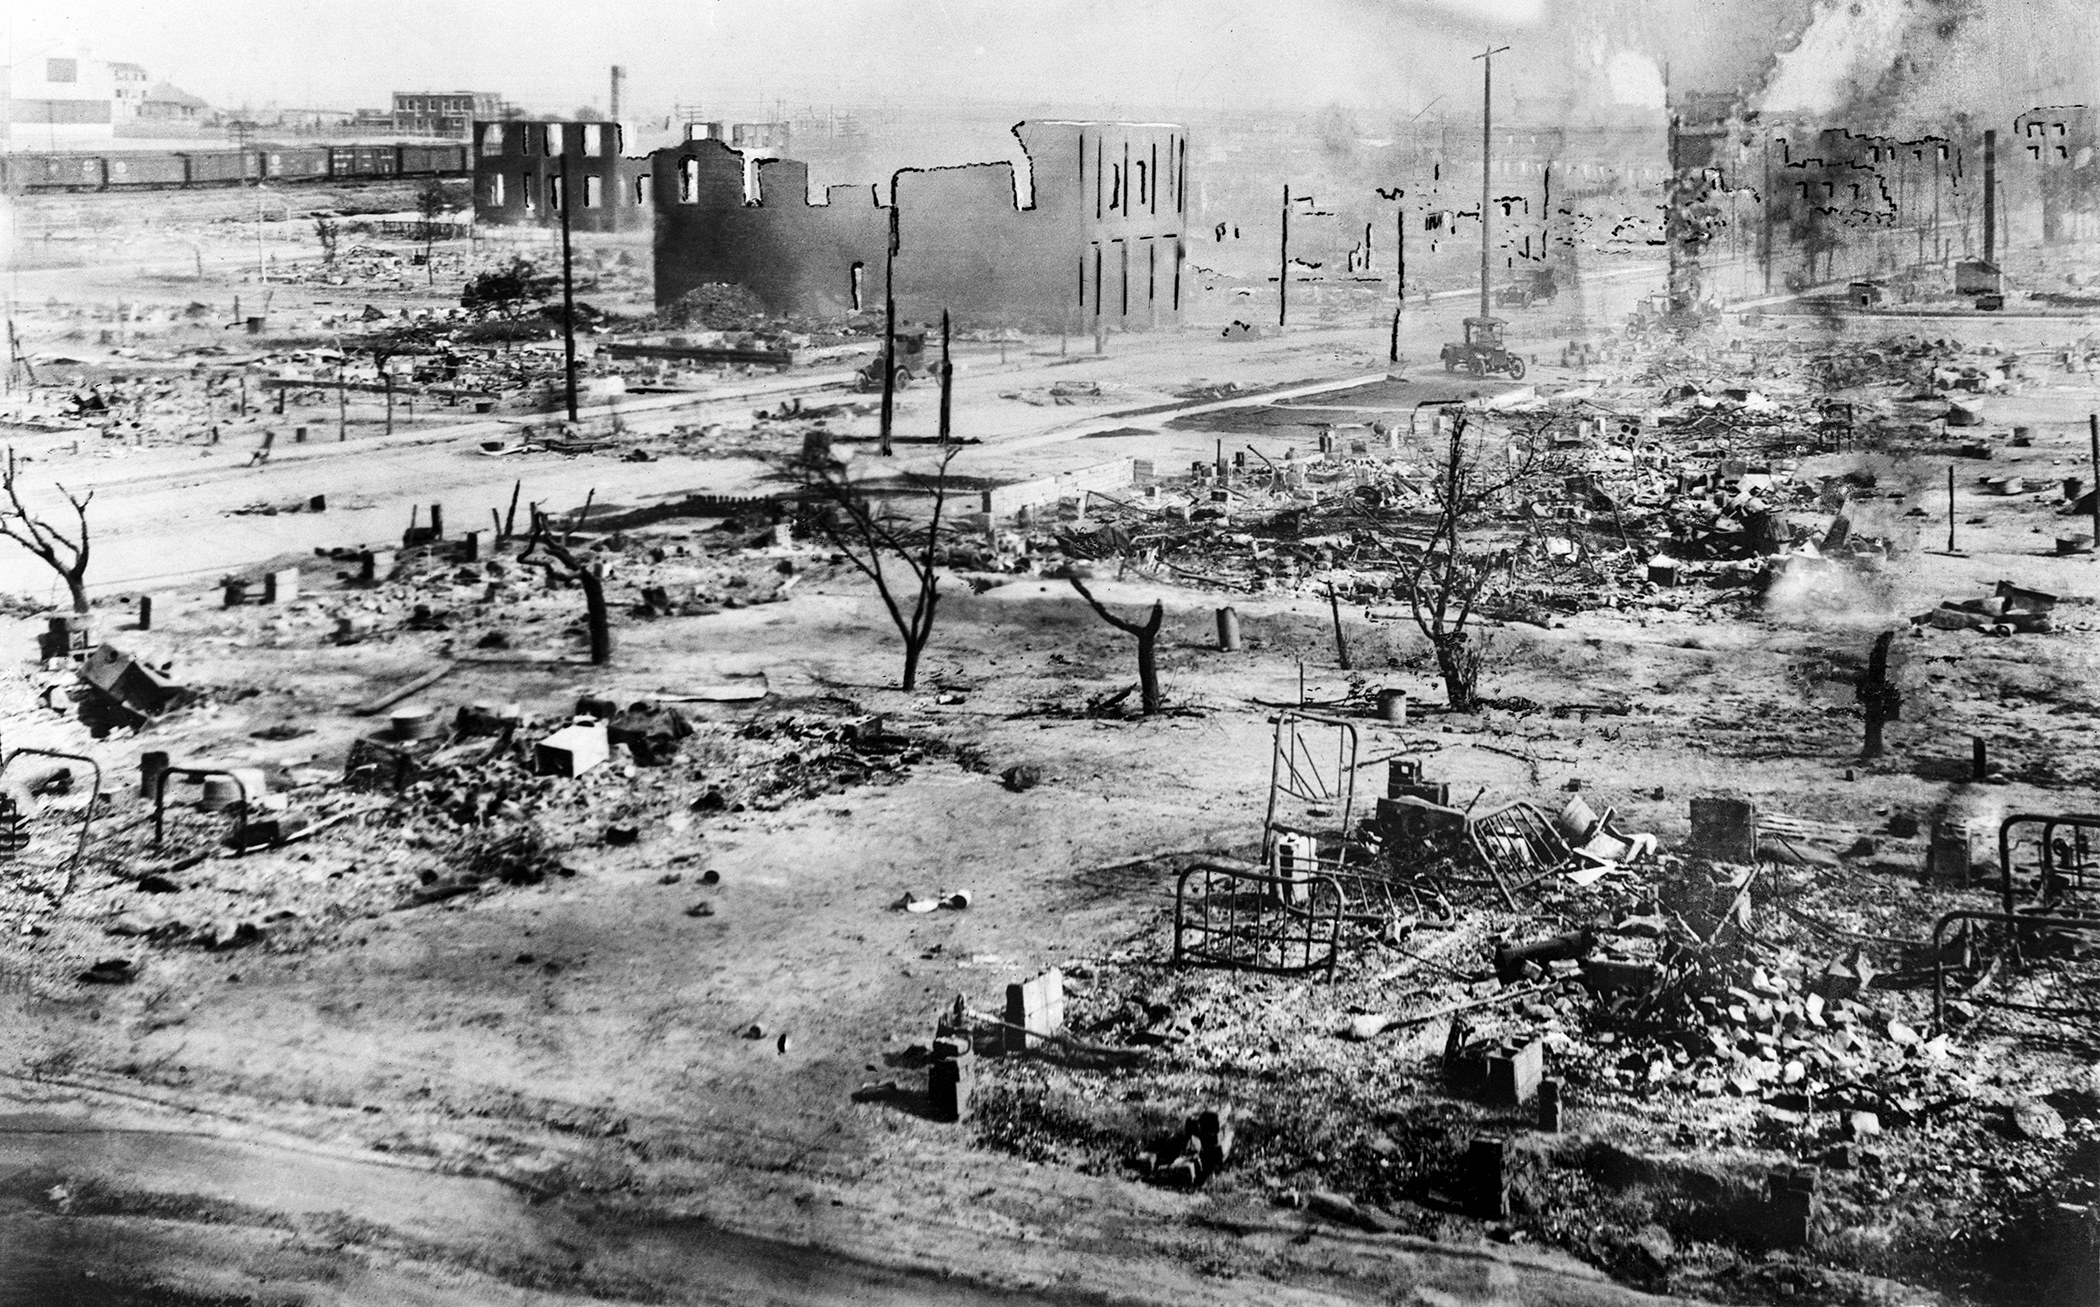 The aftermath of the Tulsa massacre, in June 1921. 